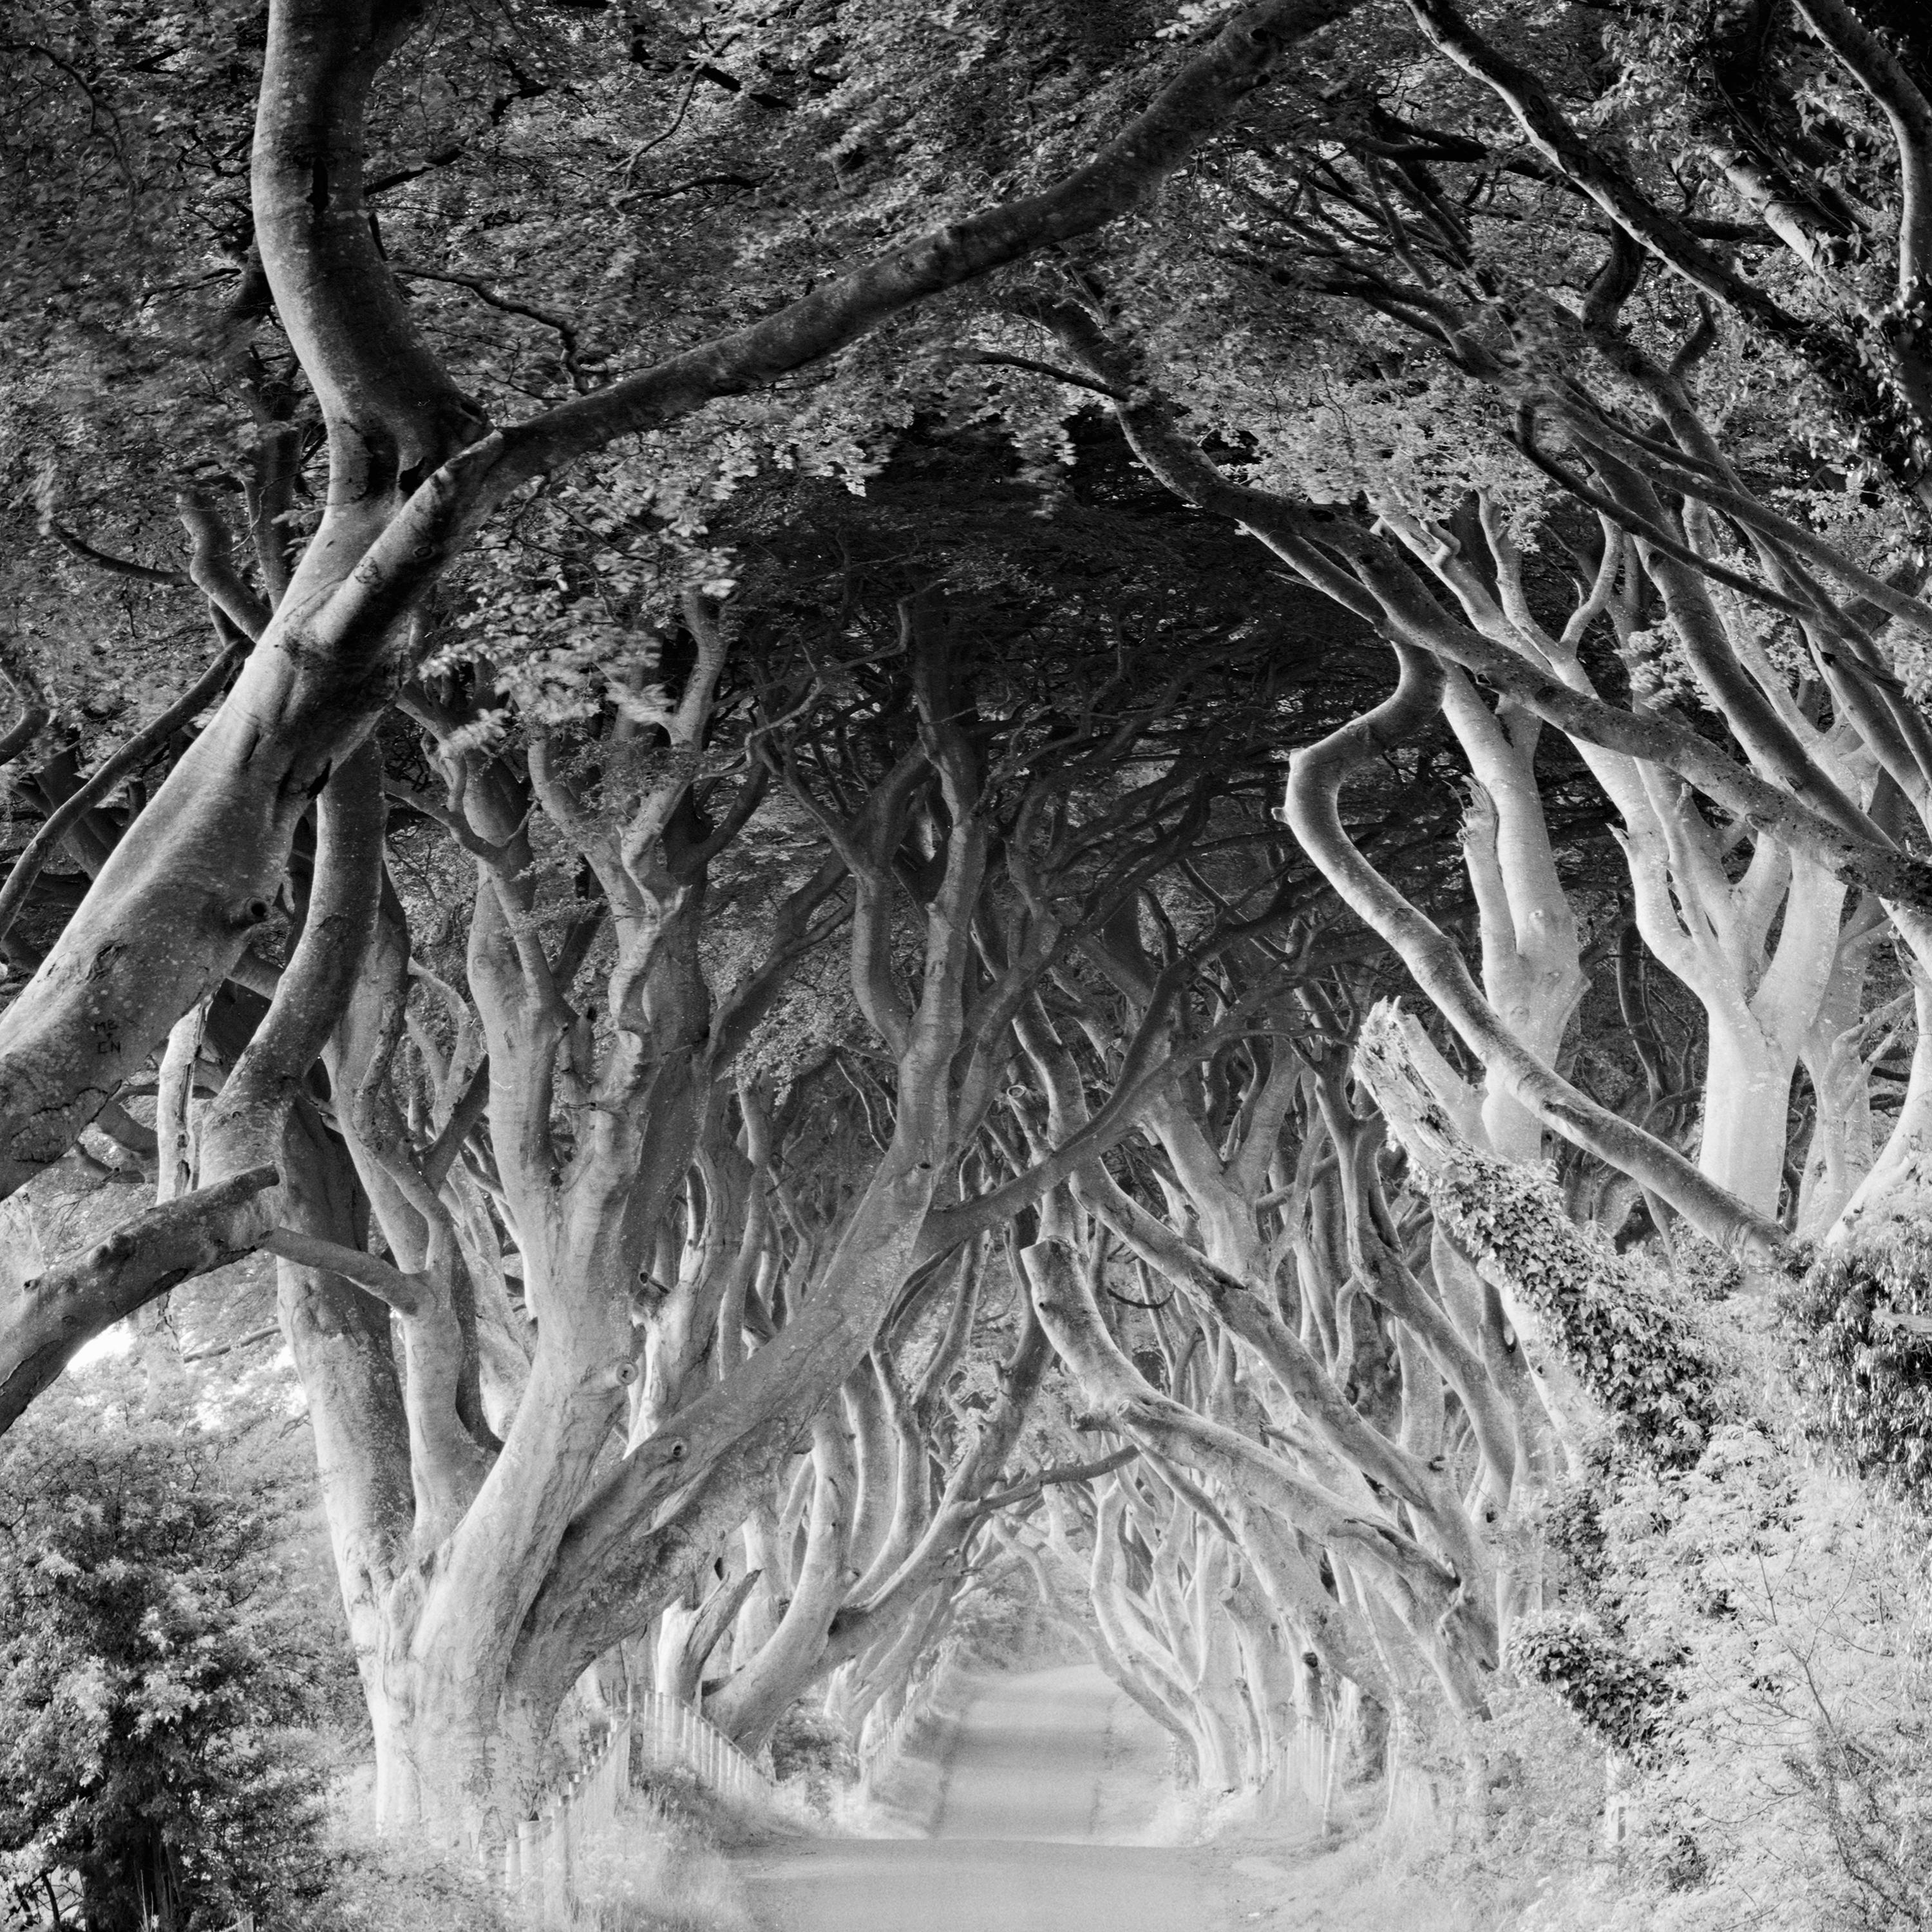 Dark Hedges, beech, trees, Ireland, black and white art landscape photography For Sale 4